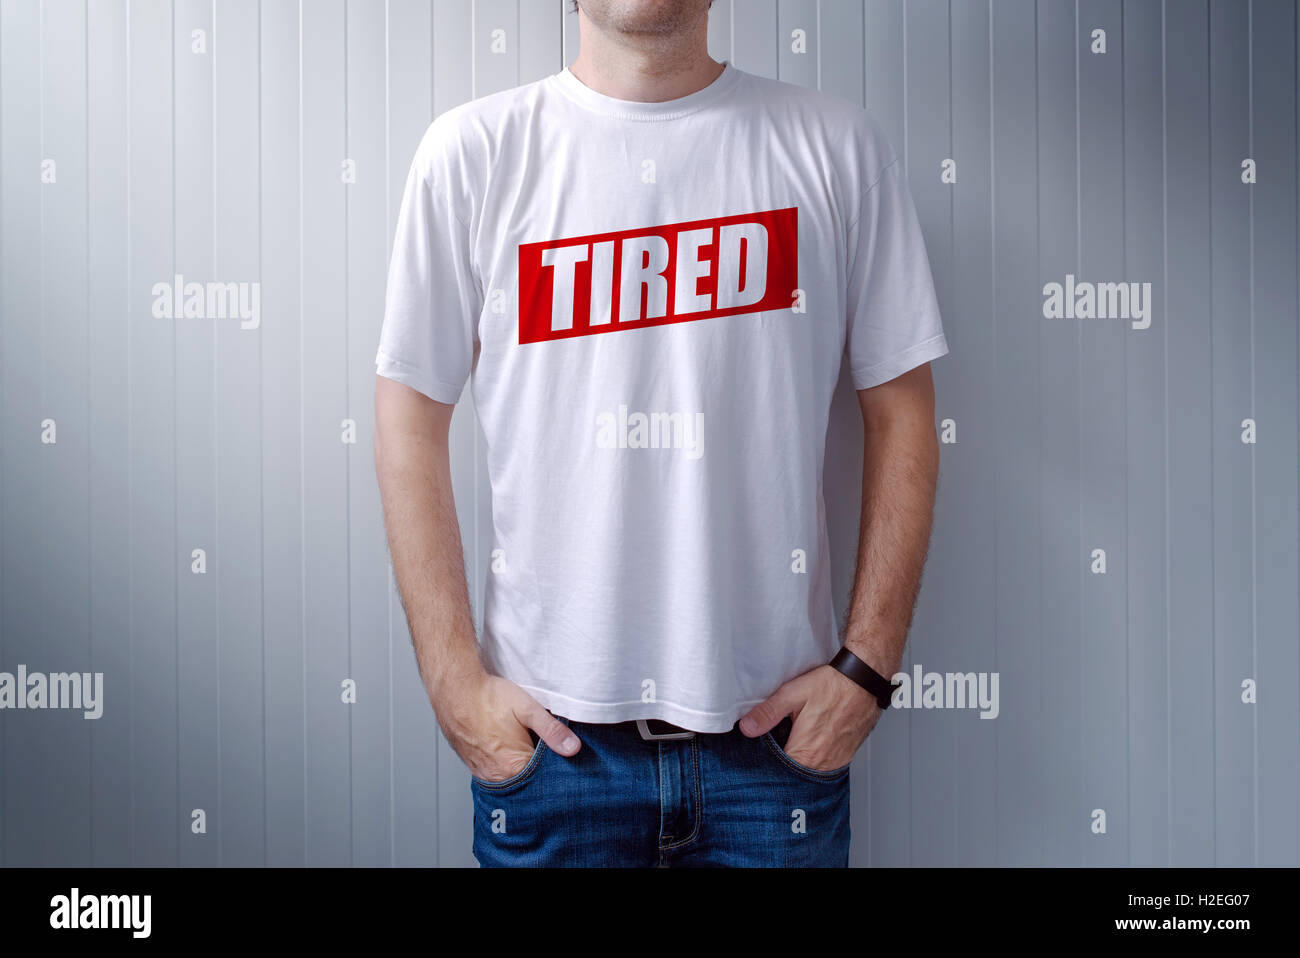 Guy wearing white t-shirt with label Tired printed on chest, text is added in post production Stock Photo